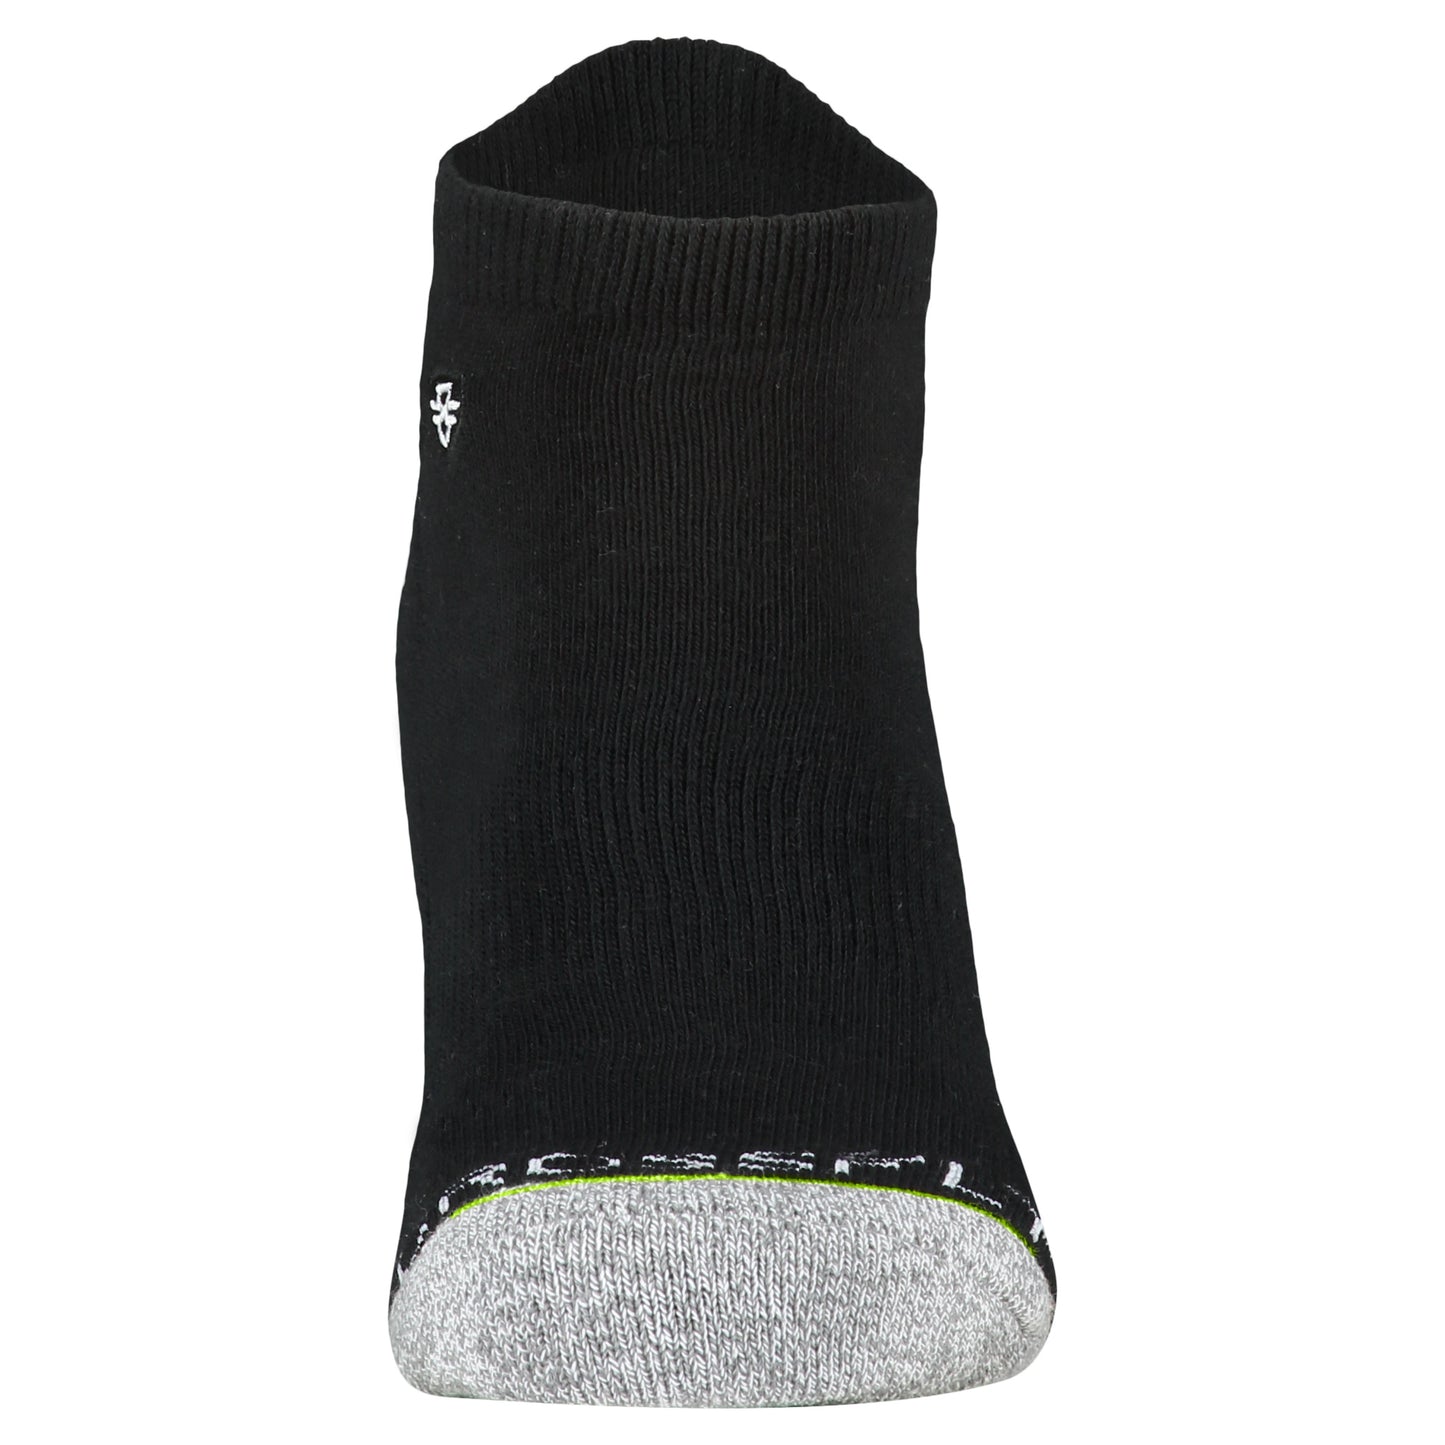 Crossfly men's Original Low Socks in black from the Everyday series, featuring Flat Toe Seams and 360 Hold.